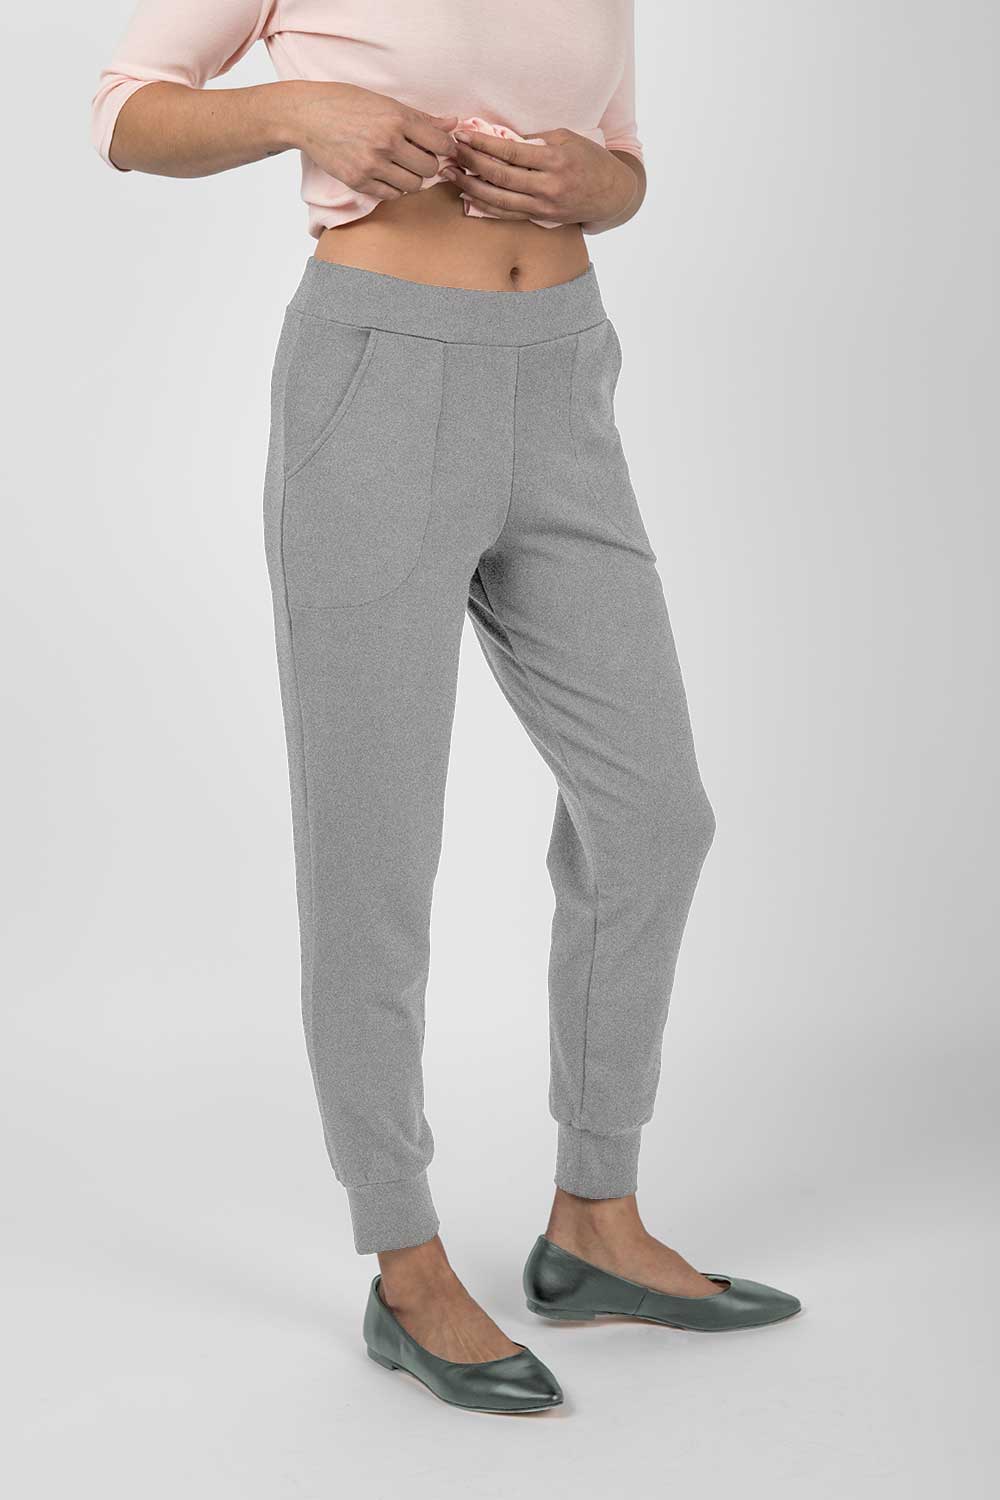 Essential summer jogger pants(27.5 inch inseam)